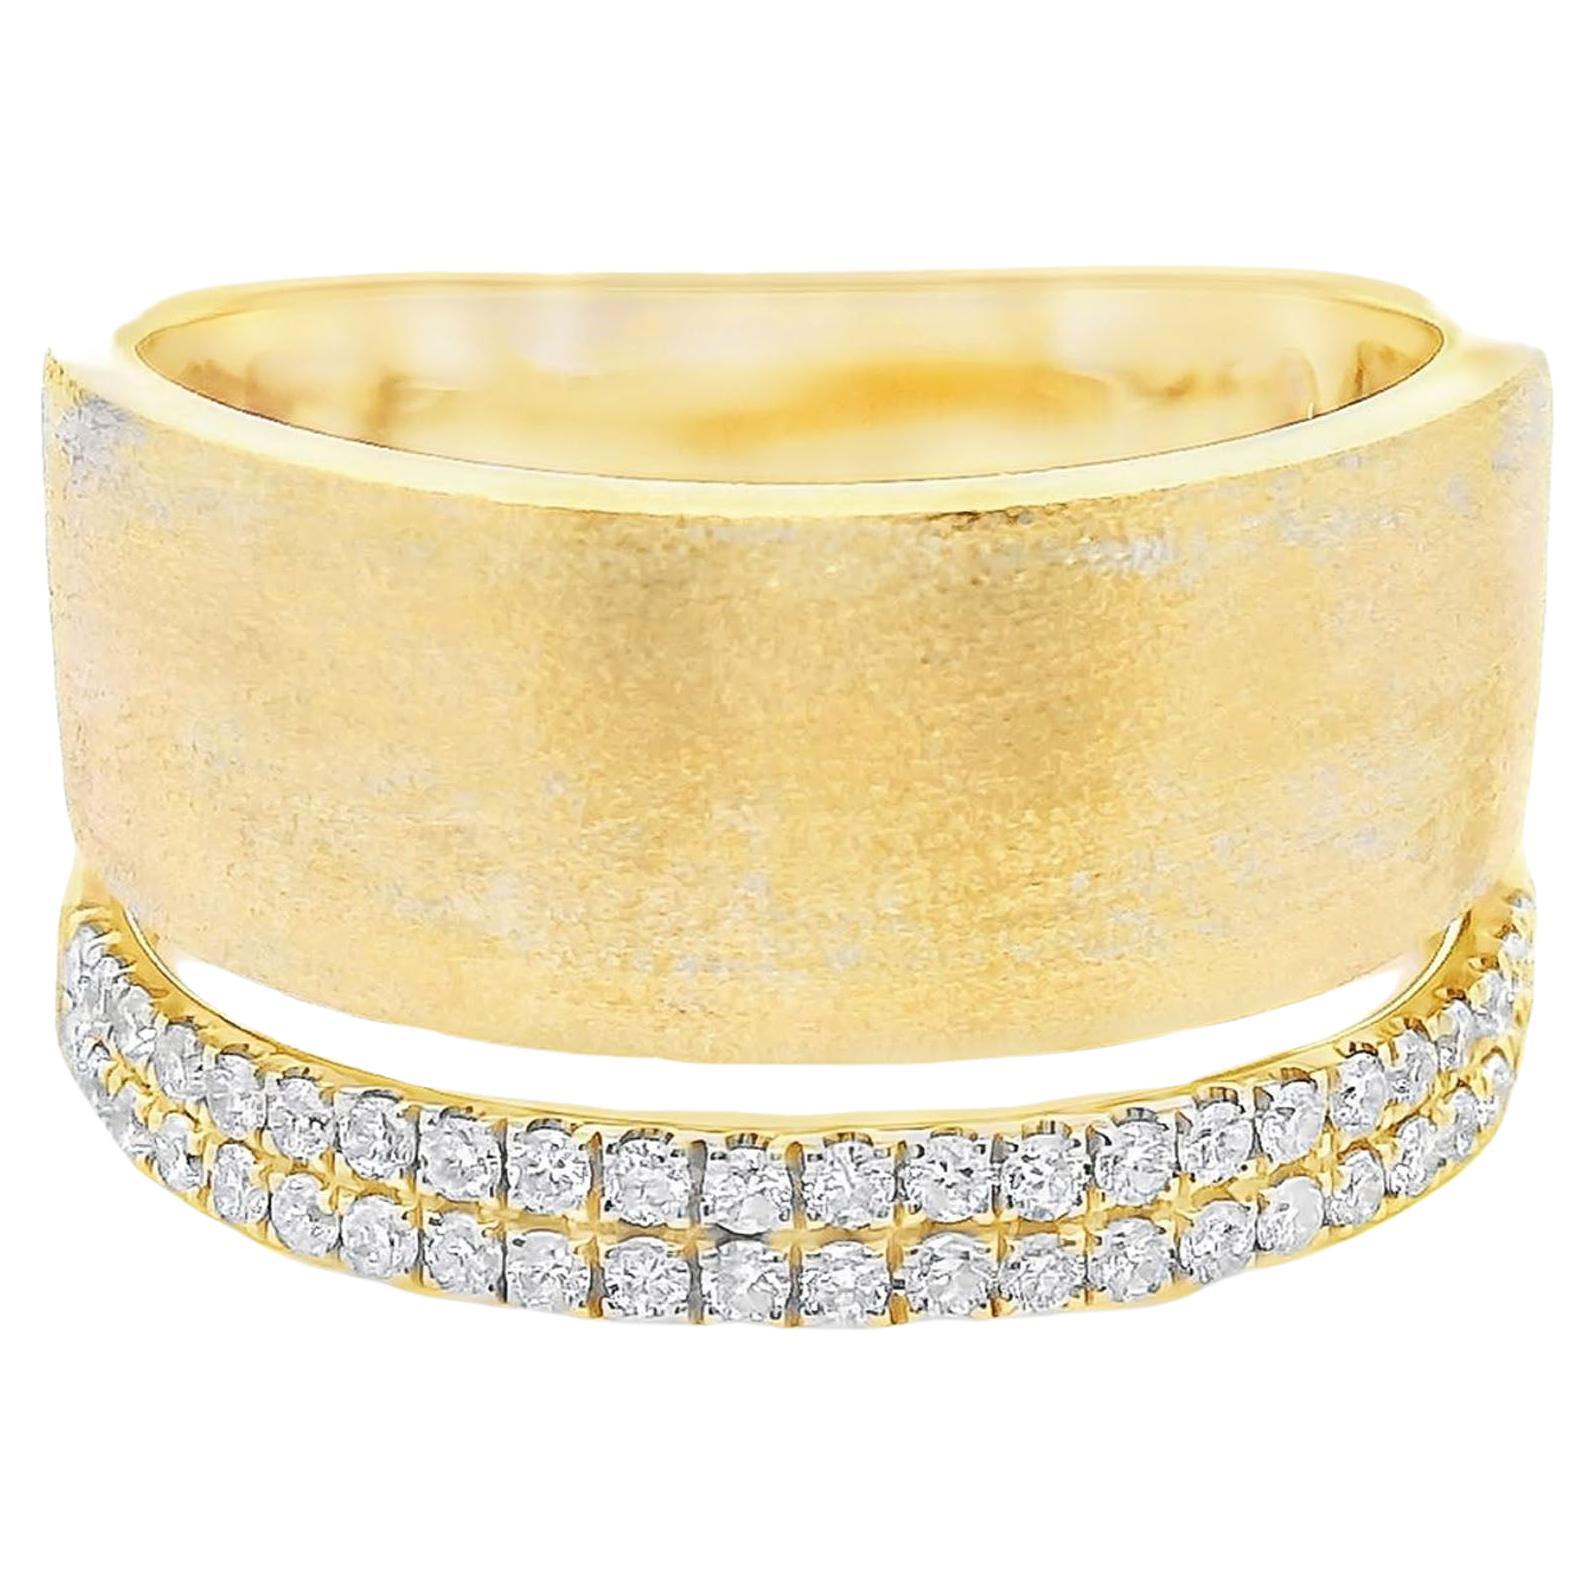 18K Yellow Gold Wide Band Ring with Row of Pave Diamonds